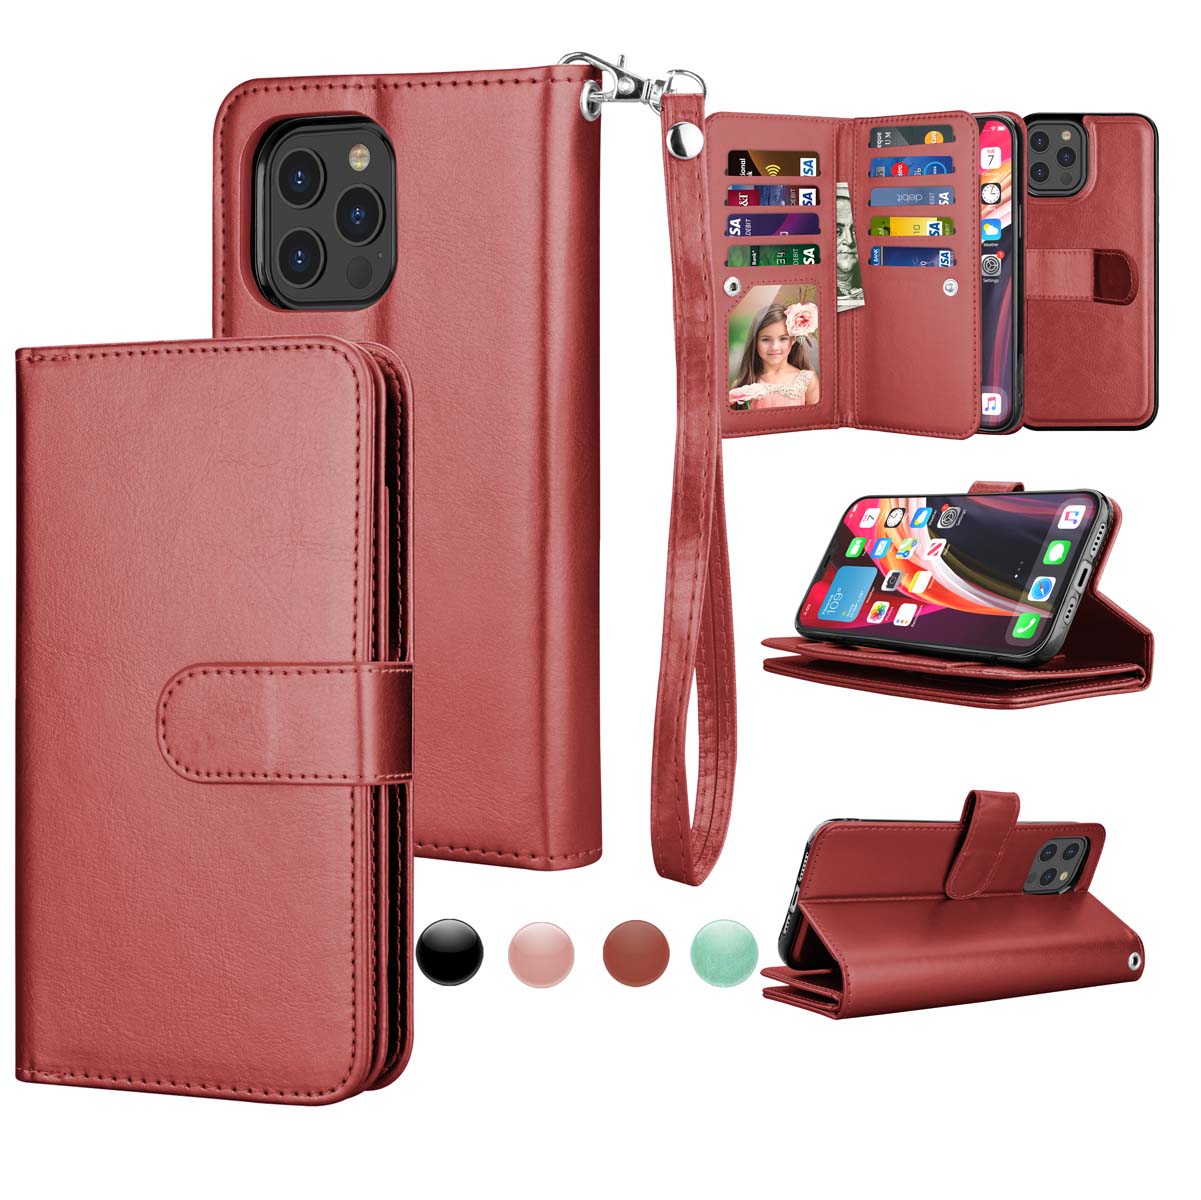 iPhone 12 Mini Case, Wallet Case iPhone 12, iPhone 12 Mini PU Leather Case, Njjex PU Leather Magnet Stand Wallet Credit Card Holder Flip Case 9 Card Slots Case for Apple iPhone 12 Mini 5.4" 2020 -Wine - image 1 of 6